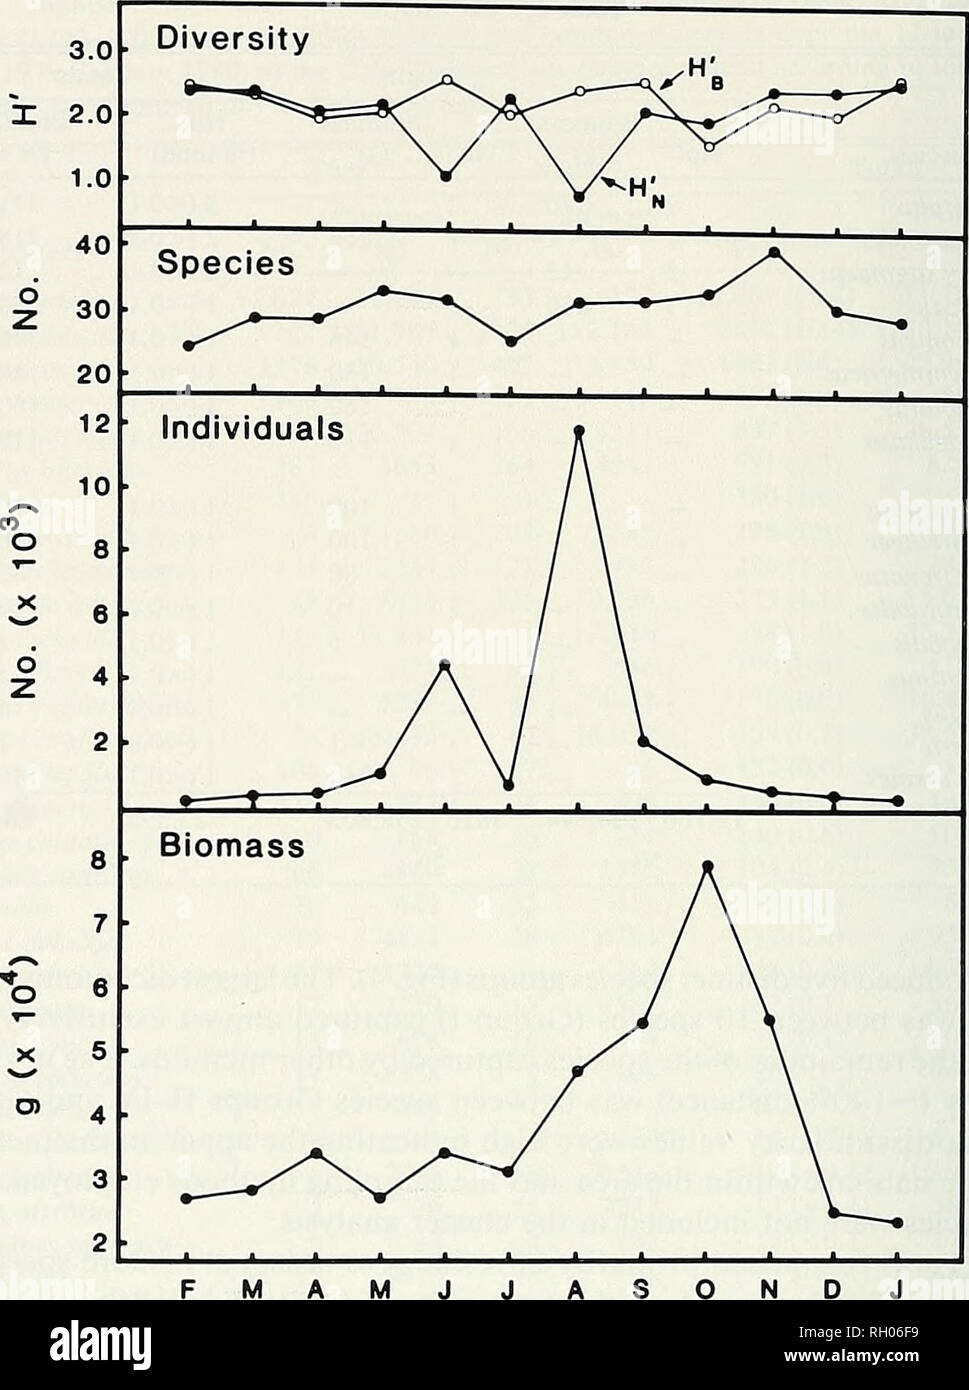 . Bulletin. Science; Natural history; Natural history. 56 SOUTHERN CALIFORNIA ACADEMY OF SCIENCES. 1979 1980 Months Fig. 3. Monthly variation (February 1979-January 1980) in diversity (Hf^' for numbers, H^' for biomass), number of species, number of individuals, and biomass (g) of juvenile-adult fishes collected by all methods at the Cabrillo Beach site. Mustehis californicus. Sphyraena argentea (California barracuda), Triakis semi- fasciata (leopard shark), and Sarda chiliensis (Pacific bonito). Group IV was made up of 16 relatively rare species that were captured in varying numbers by all th Stock Photo